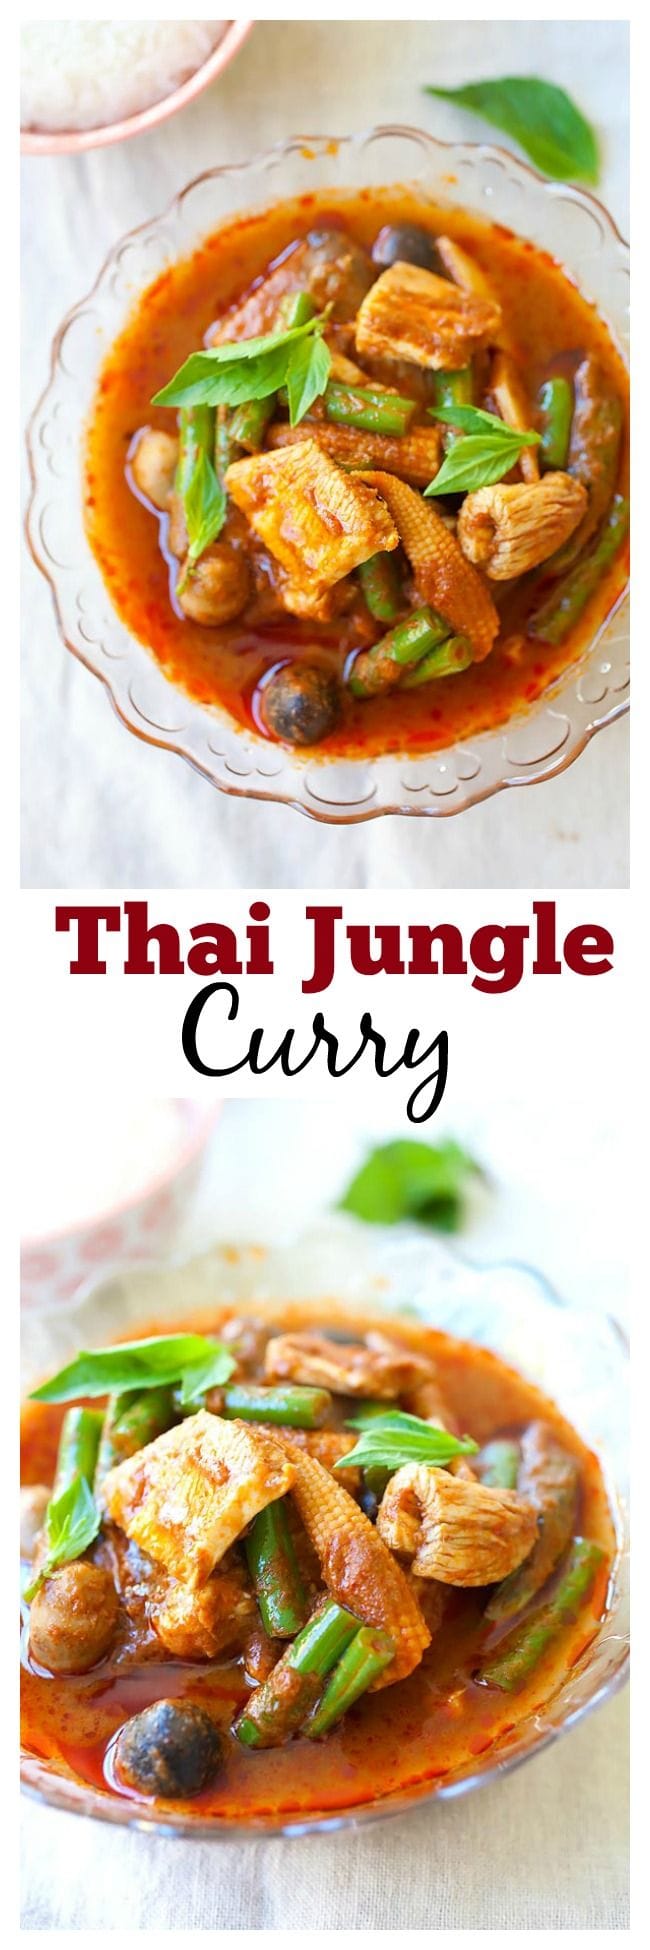 Jungle curry is a popular Thai curry. Jungle curry is spicy, with no coconut milk. You can make pork or chicken jungle curry with this easy recipe. | rasamalaysia.com